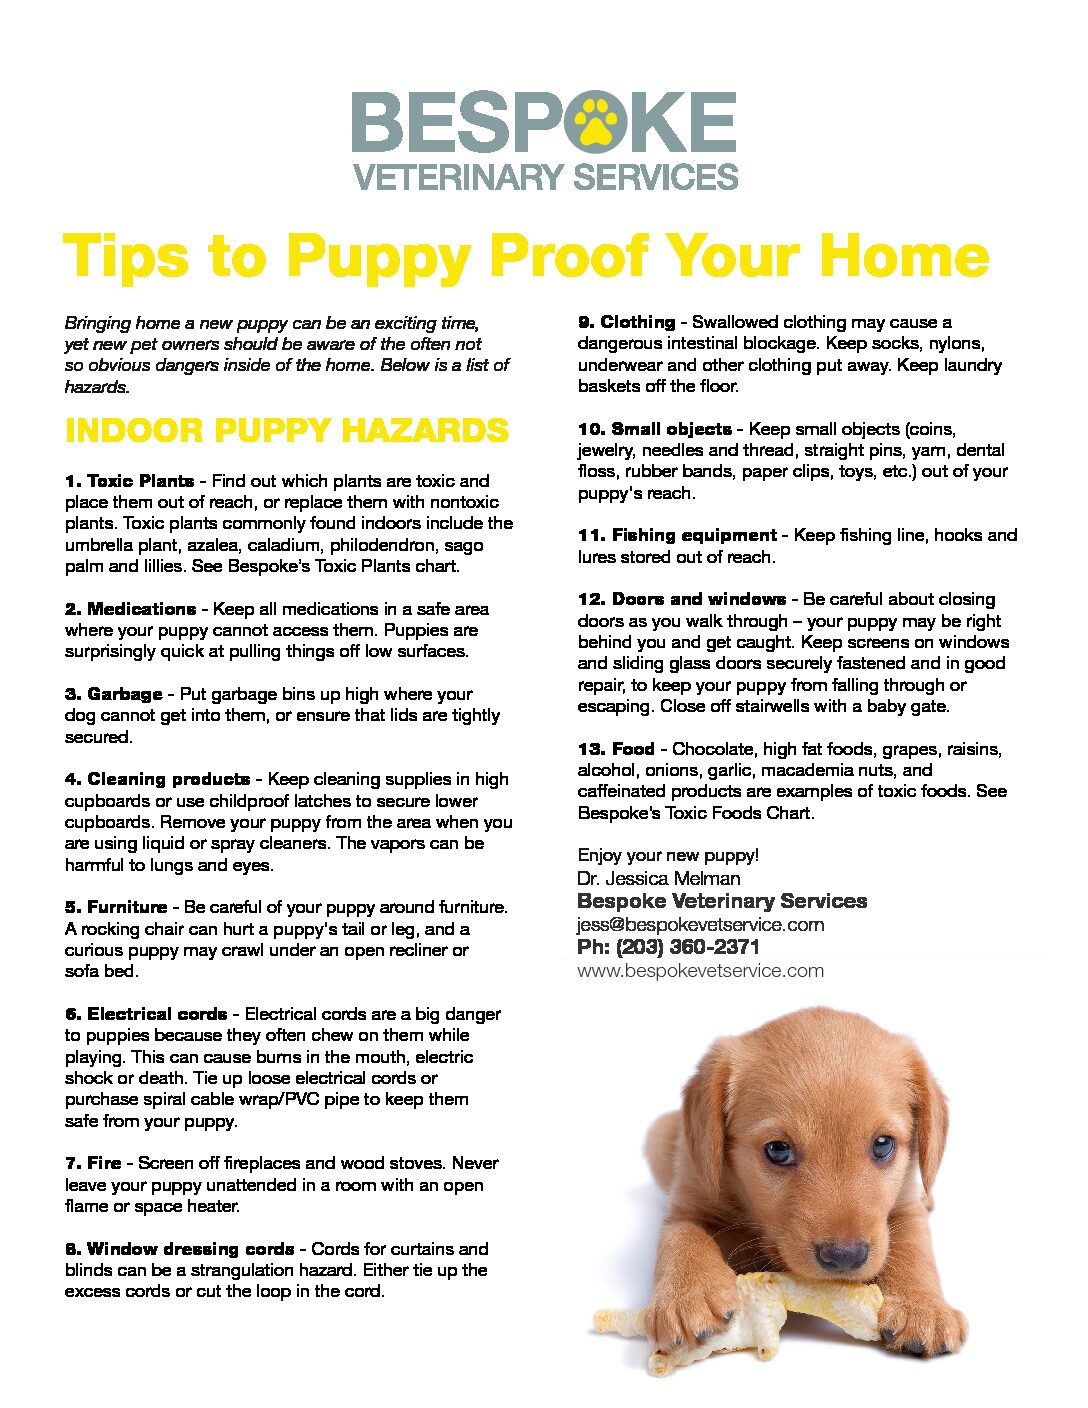 Tips to Puppy Proof Your Home